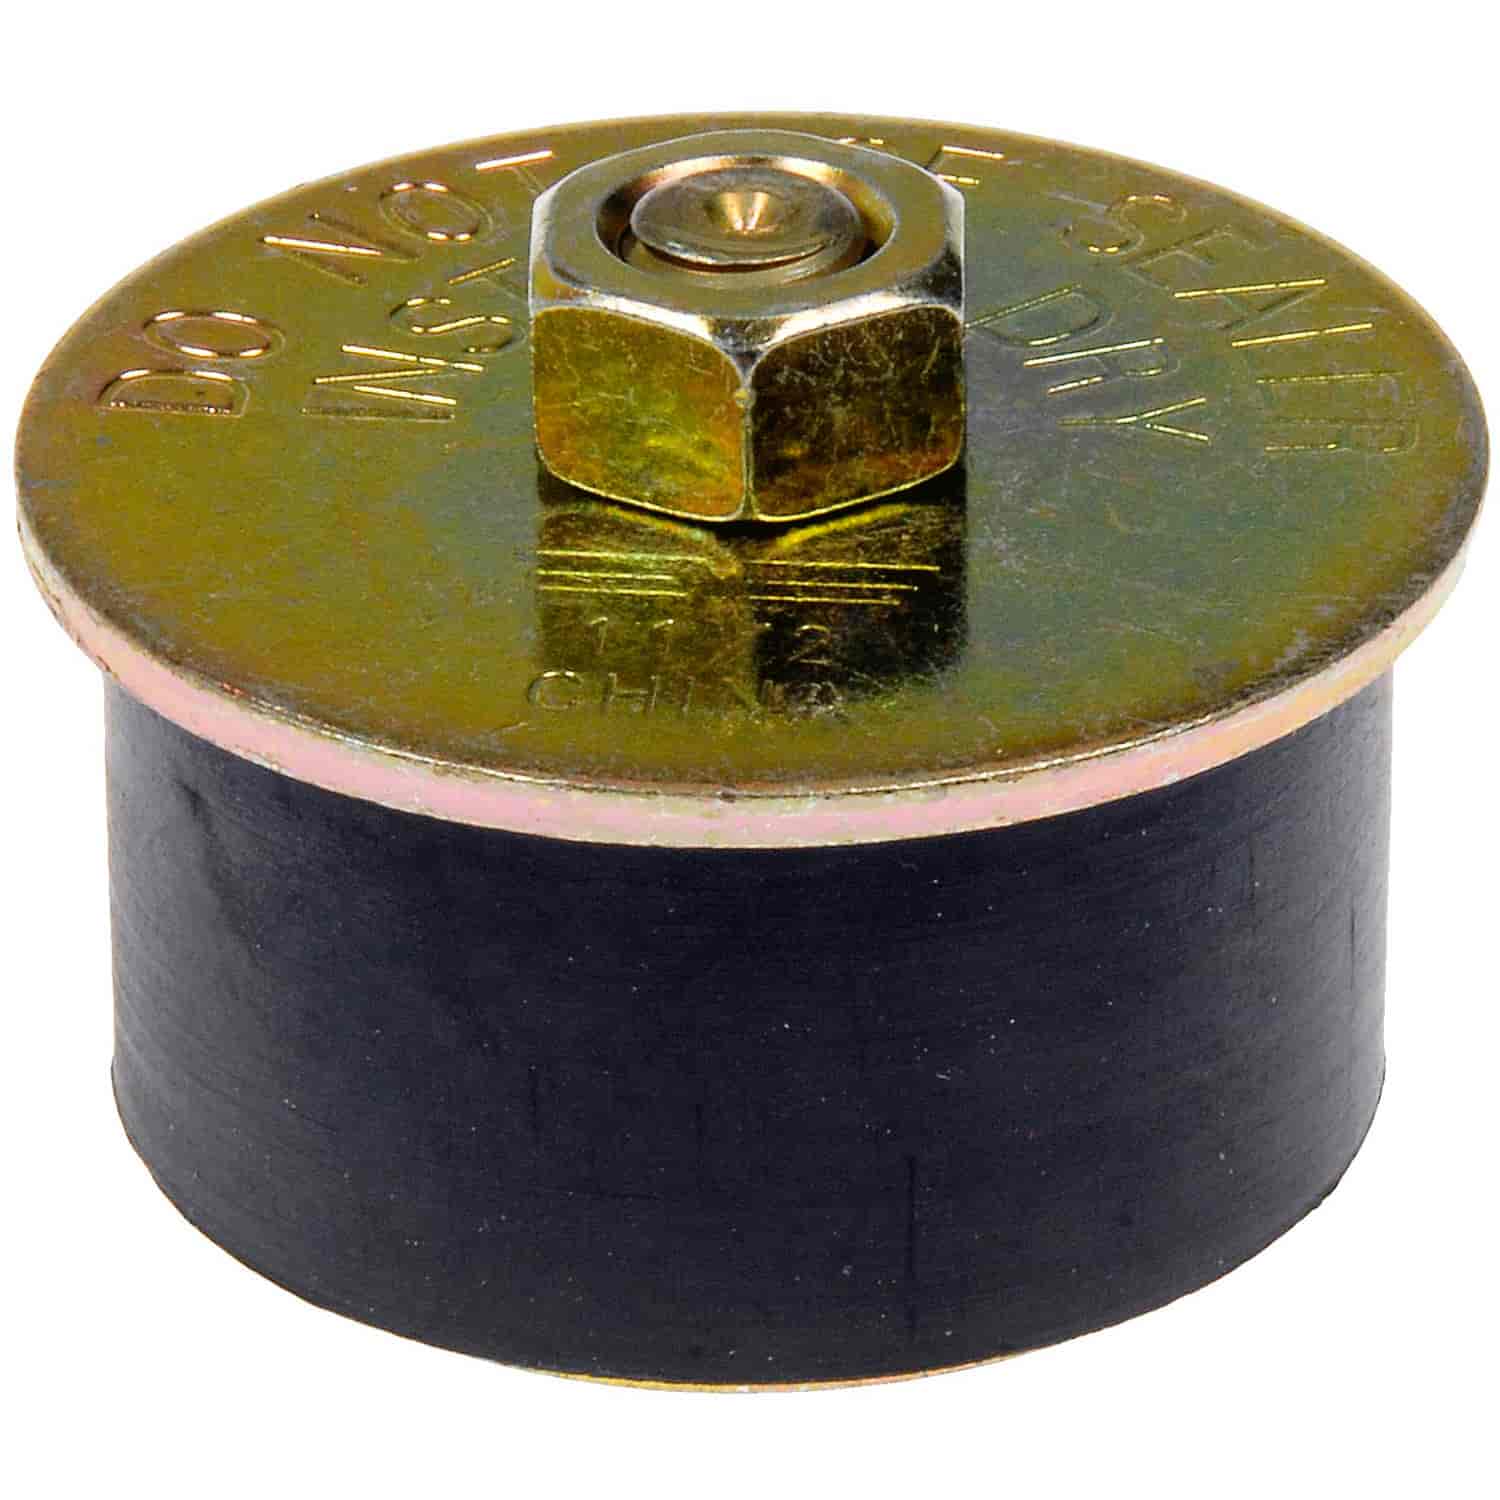 Rubber Expansion Plug 1947-1950 Chevrolet 1 1/2 in. to 1 5/8 in.